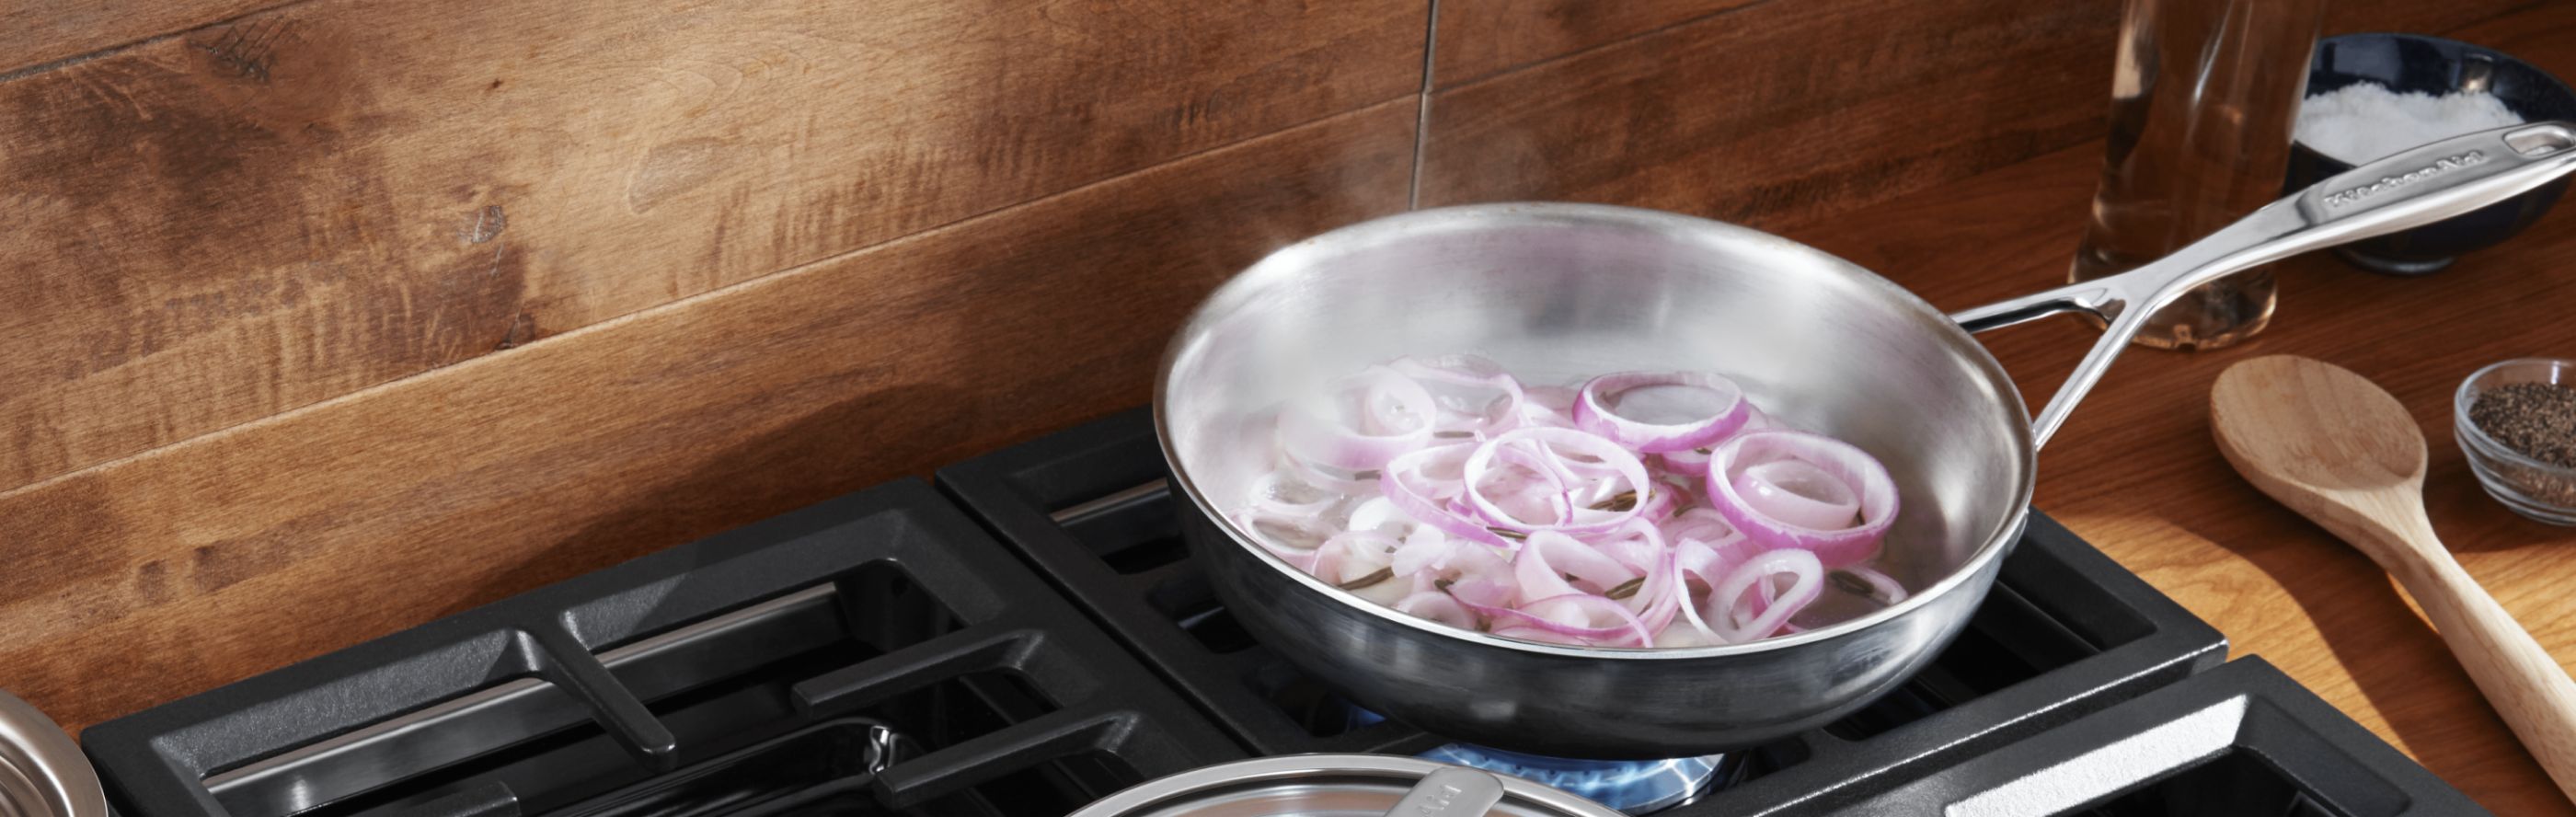 Onions cooking in KitchenAid® cookware